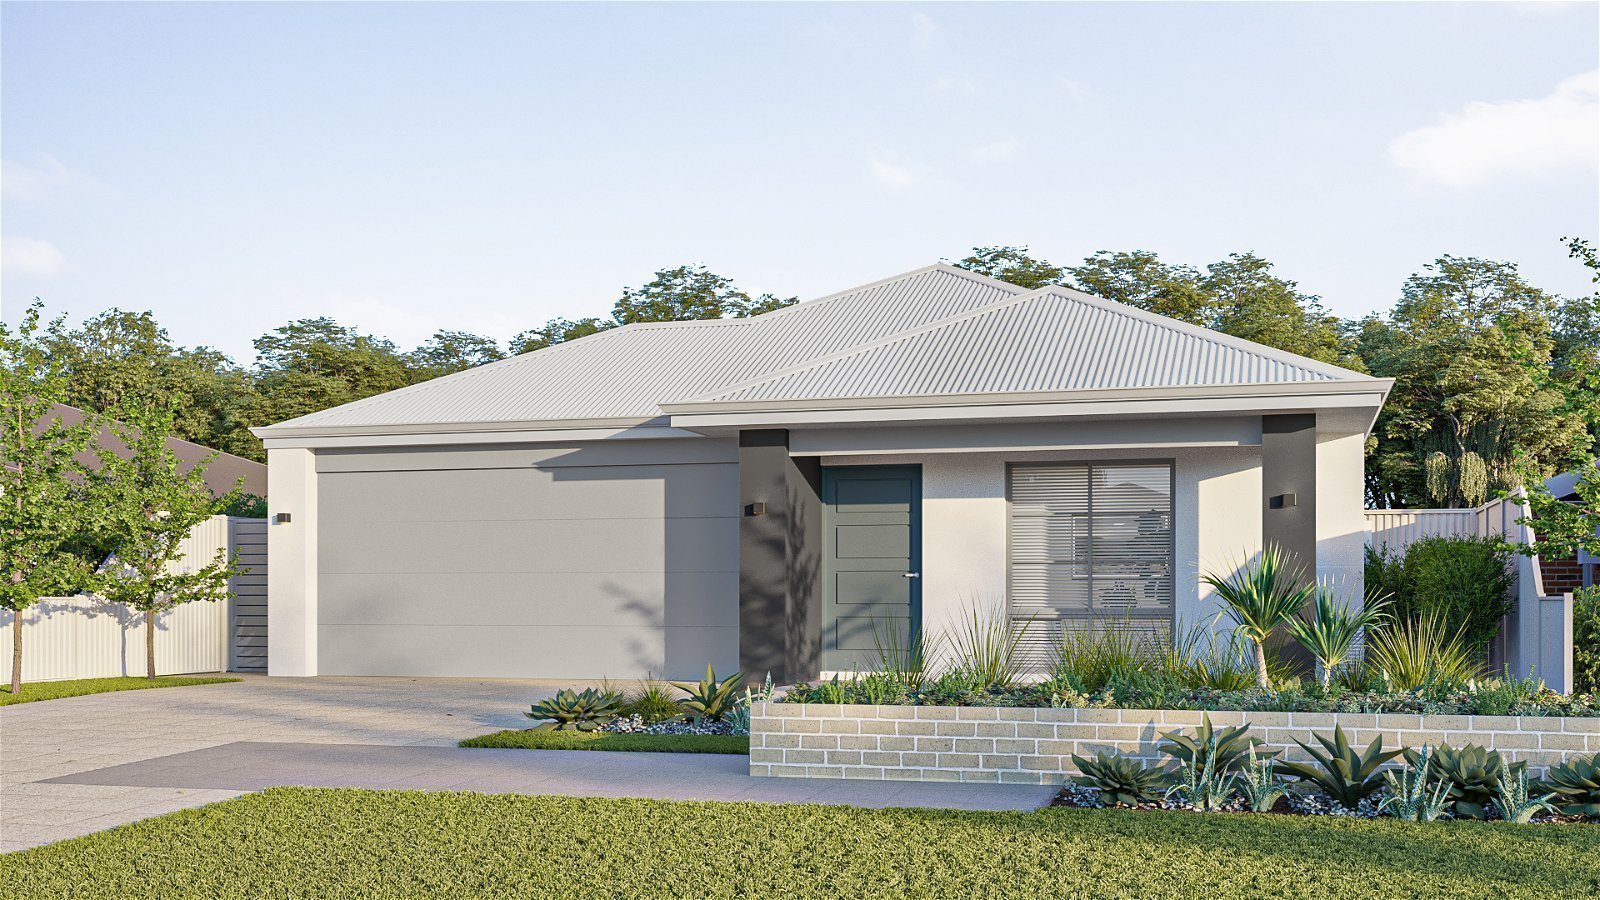 Wa Country Builders - The Amberley - Gallery - C7Eeefcd 01A9 4Ac9 8D96 Dc5542115758 2944238A 1Bf4 4340 A59F Cfd